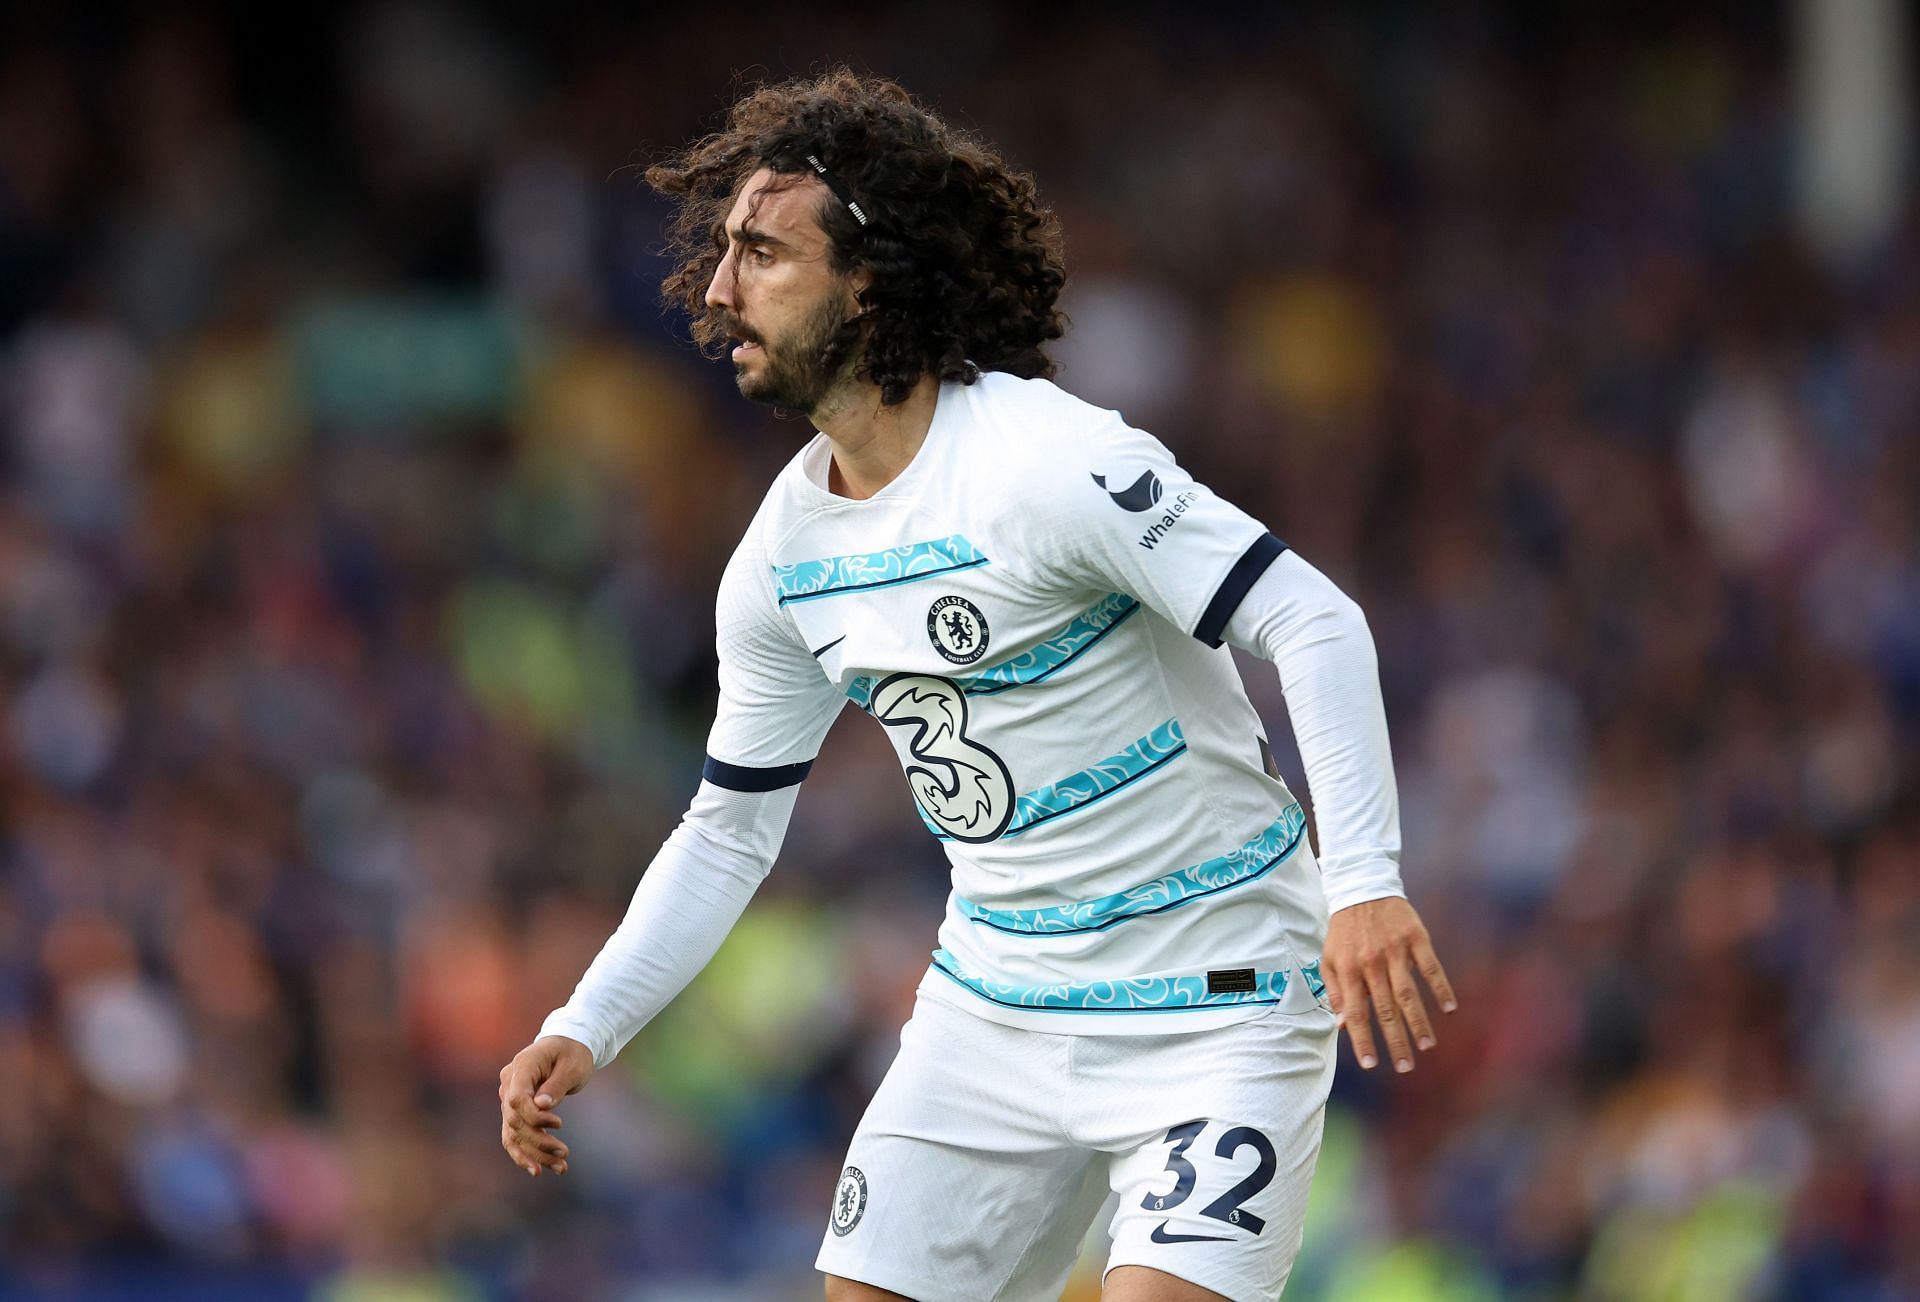 Cucurella ended up joining Chelsea